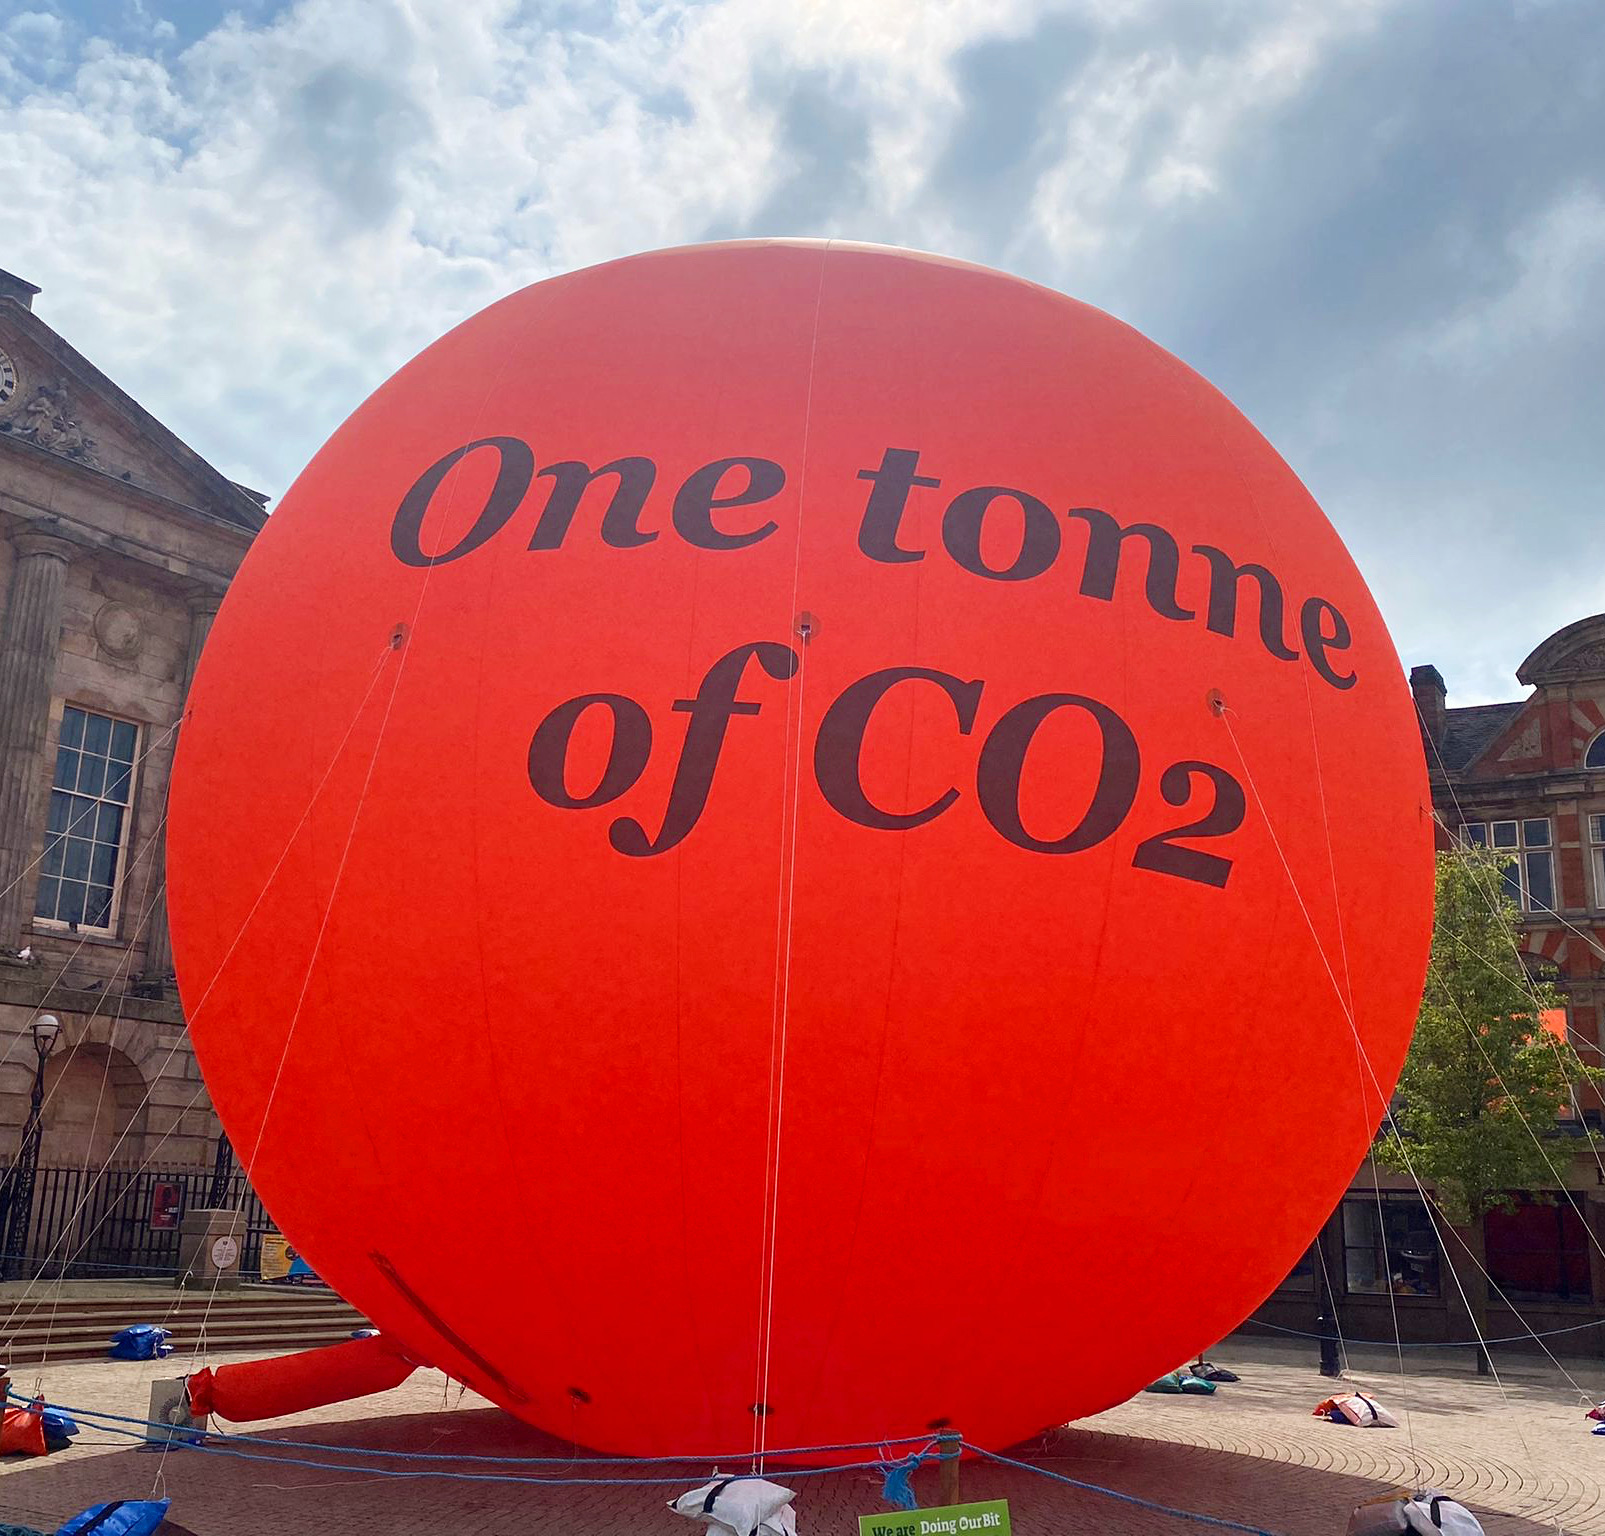 An image of a 10 metre tall orange bubble with the words &#039;One tonne of CO2&#039; written on it.